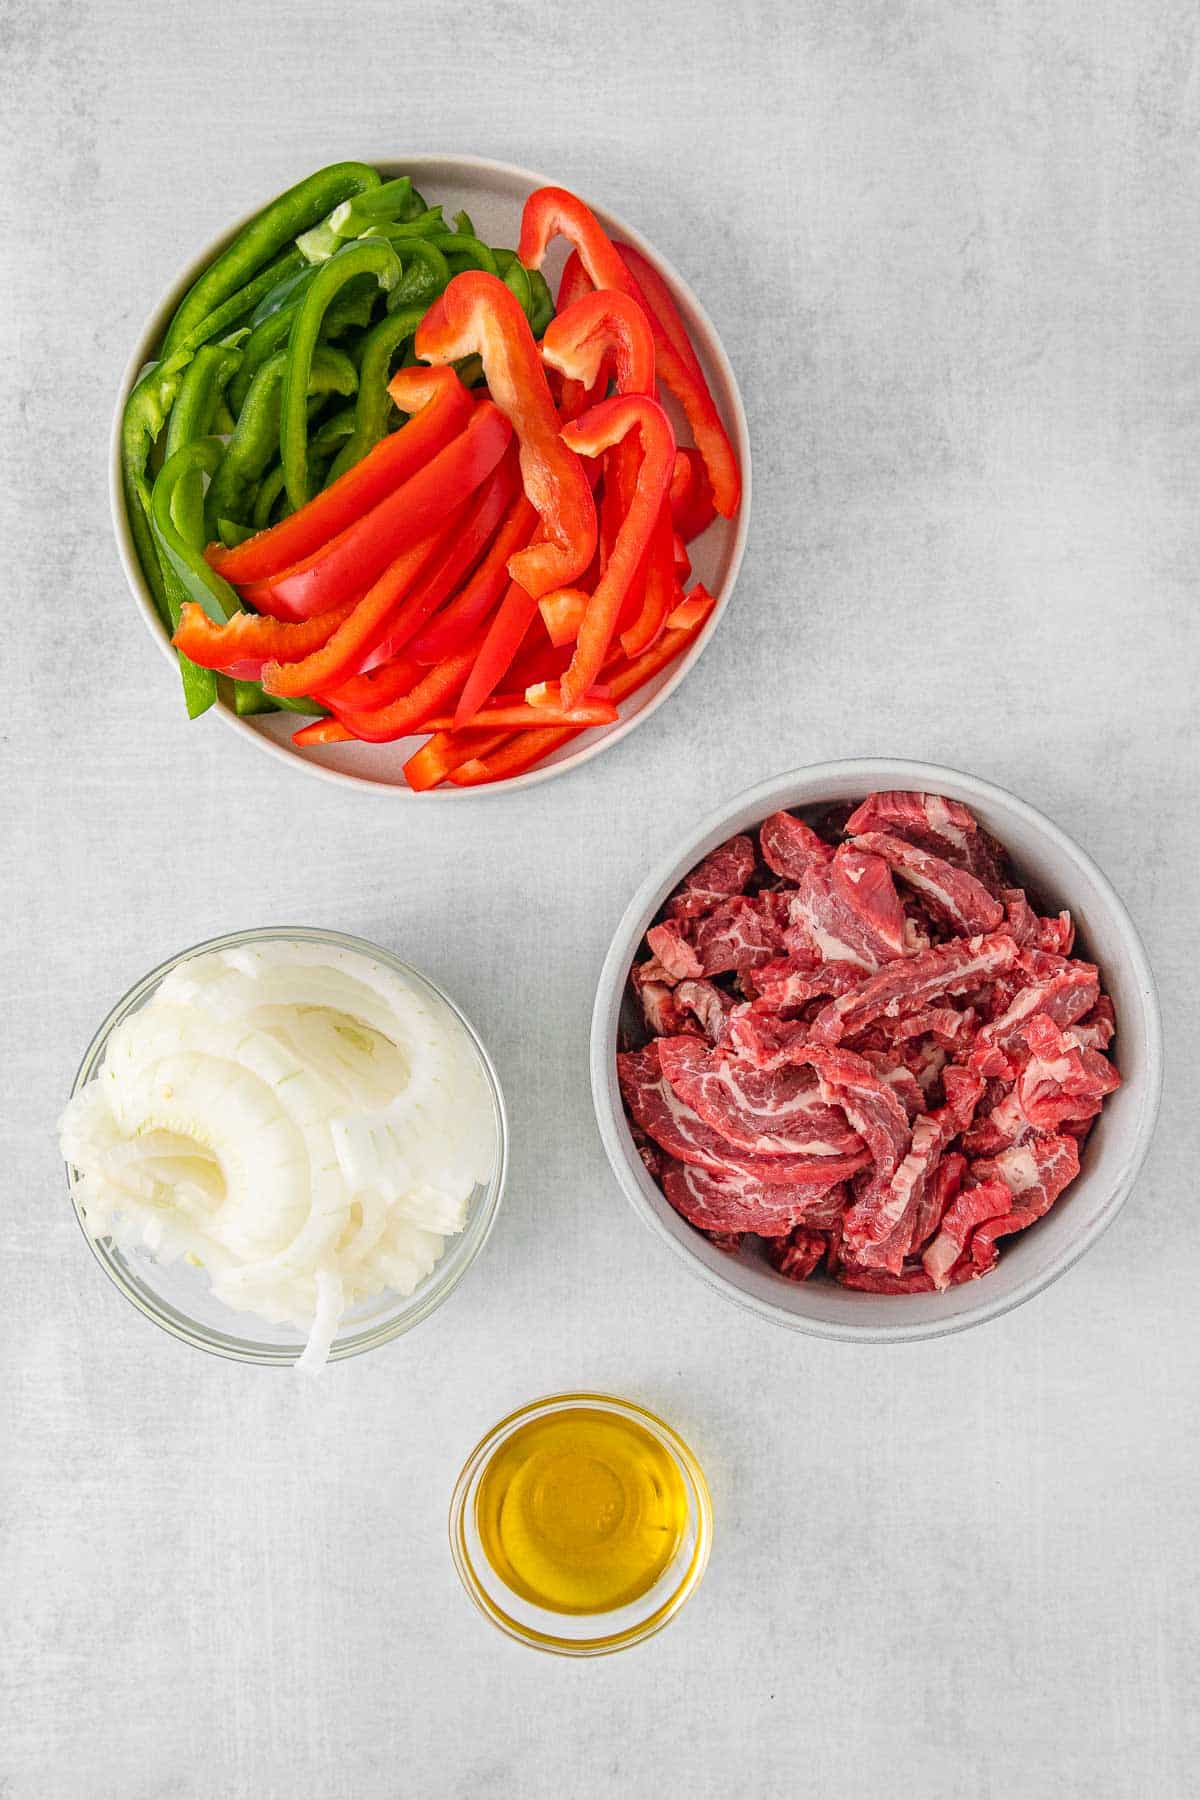 Several bowls with ingredients for Pepper Steak sauce - steak, olive oil, onion, green bell pepper and red bell pepper.